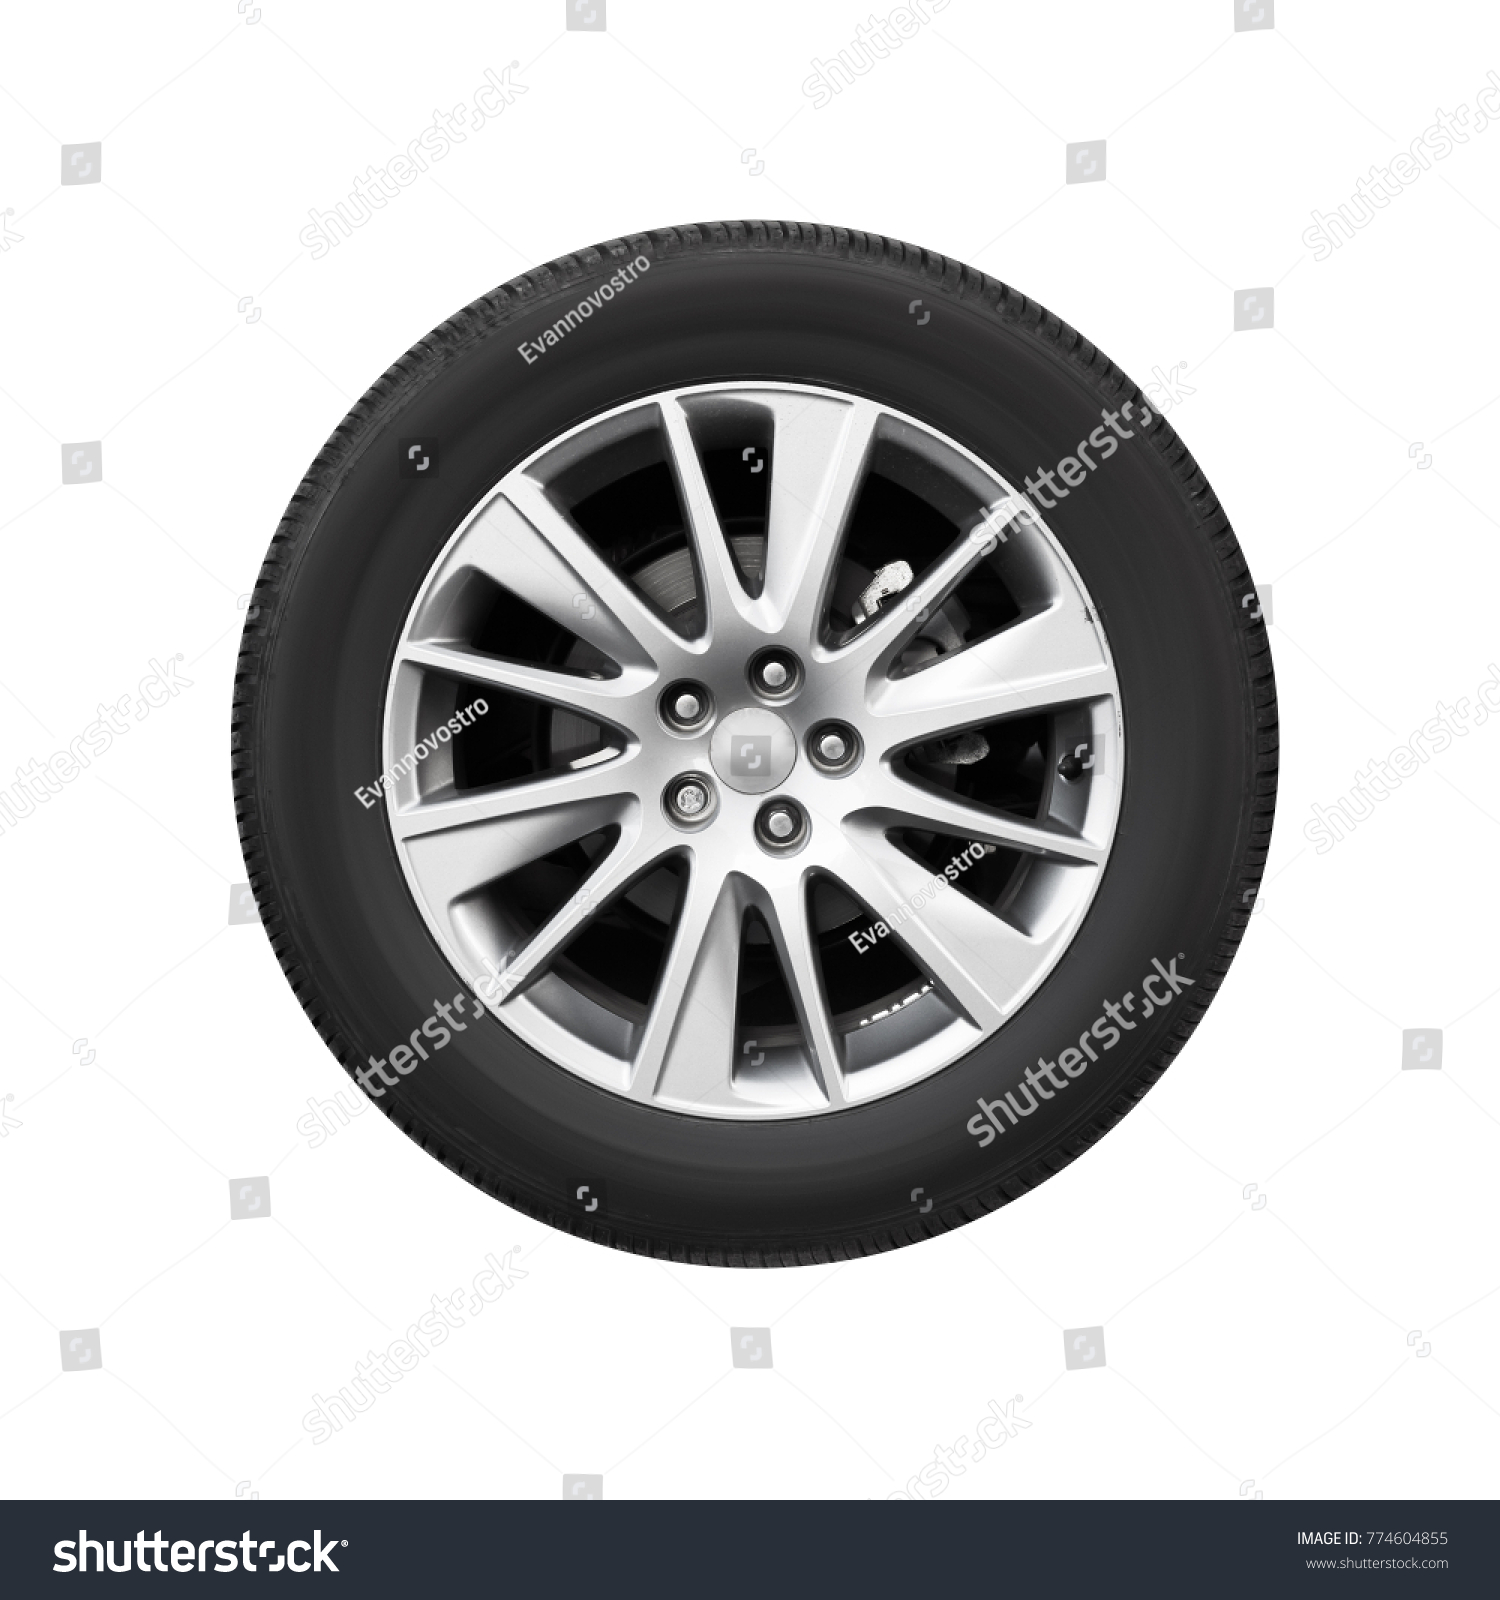 Modern car wheel on light alloy disc, front view isolated on white background #774604855